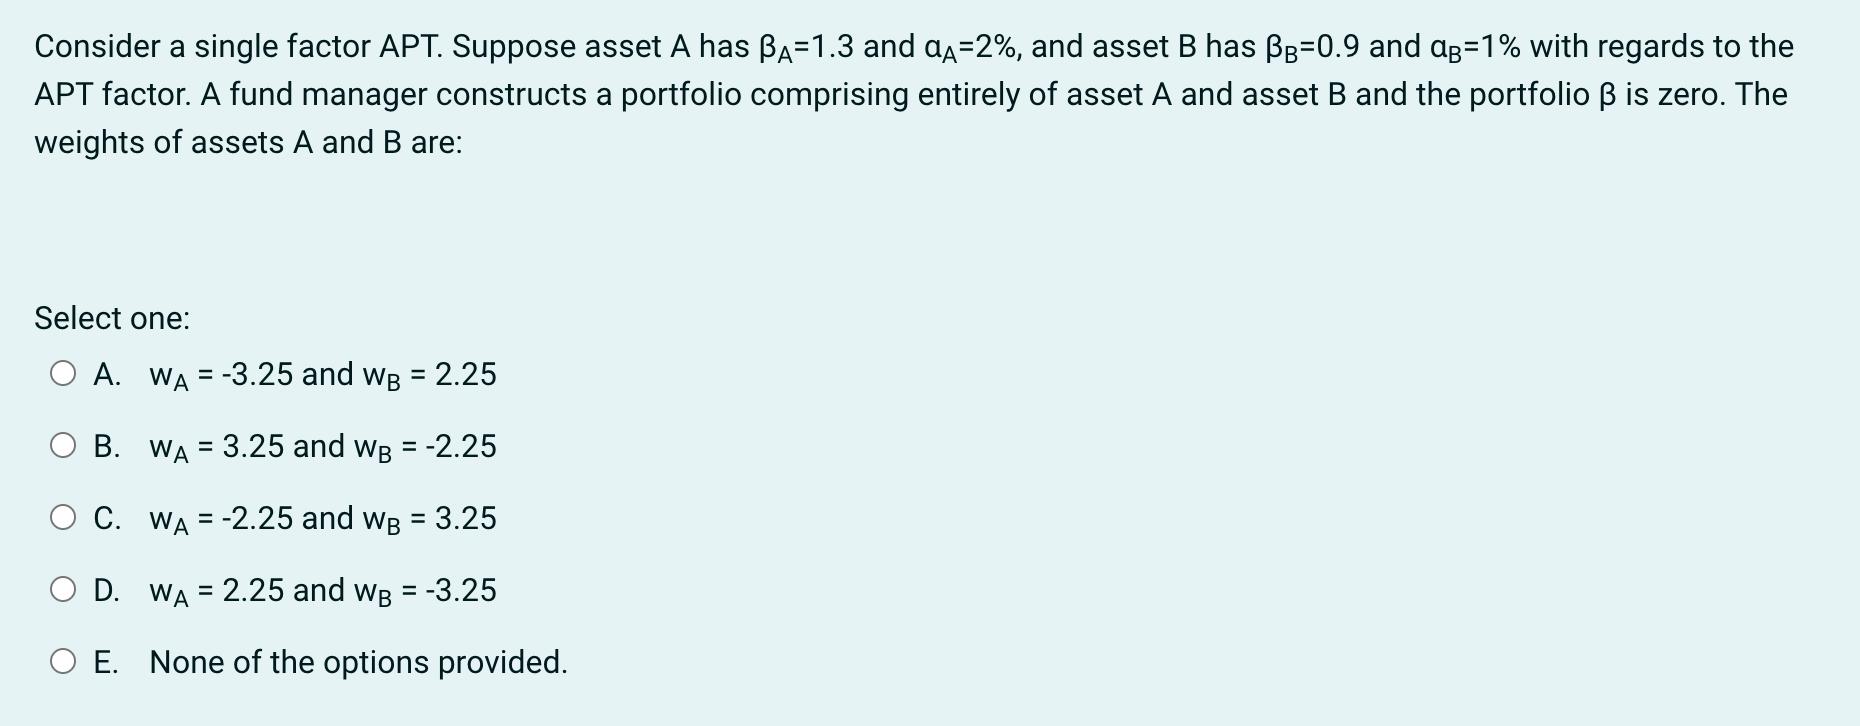 Consider a single factor APT. Suppose asset A has BA=1.3 and =2%, and asset B has BB=0.9 and ag=1% with